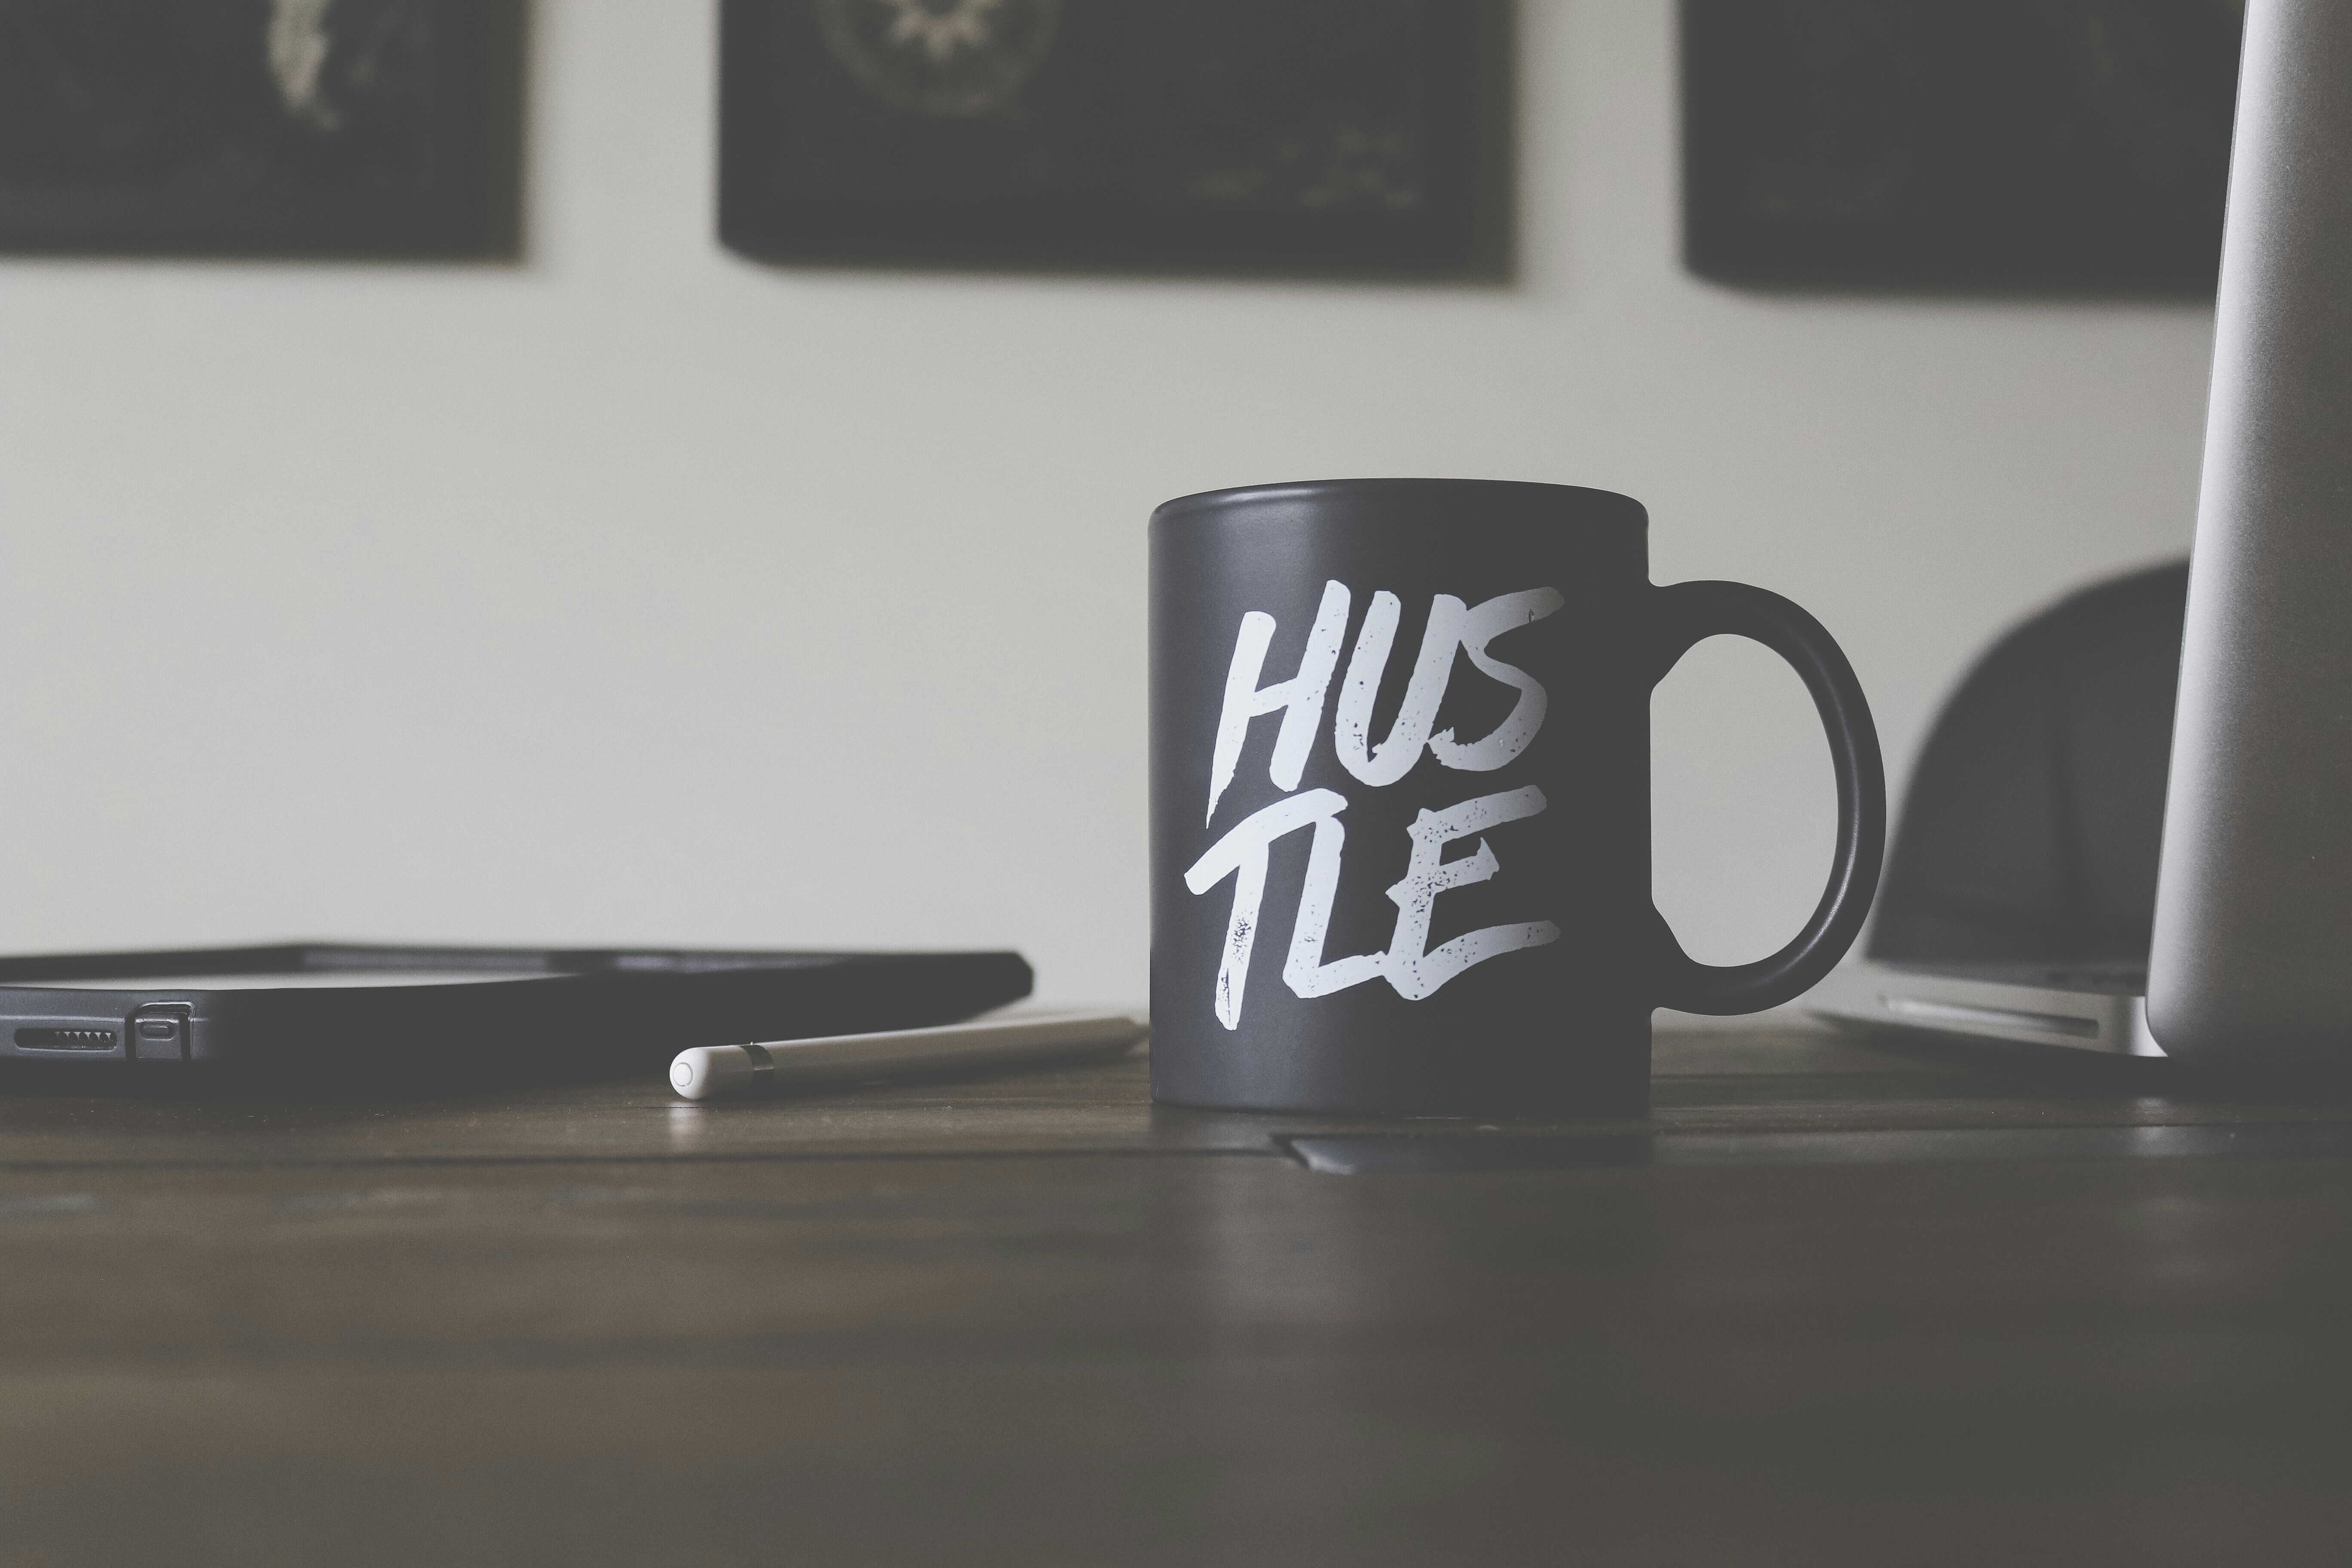 Hustle Wallpaper posted by John Anderson